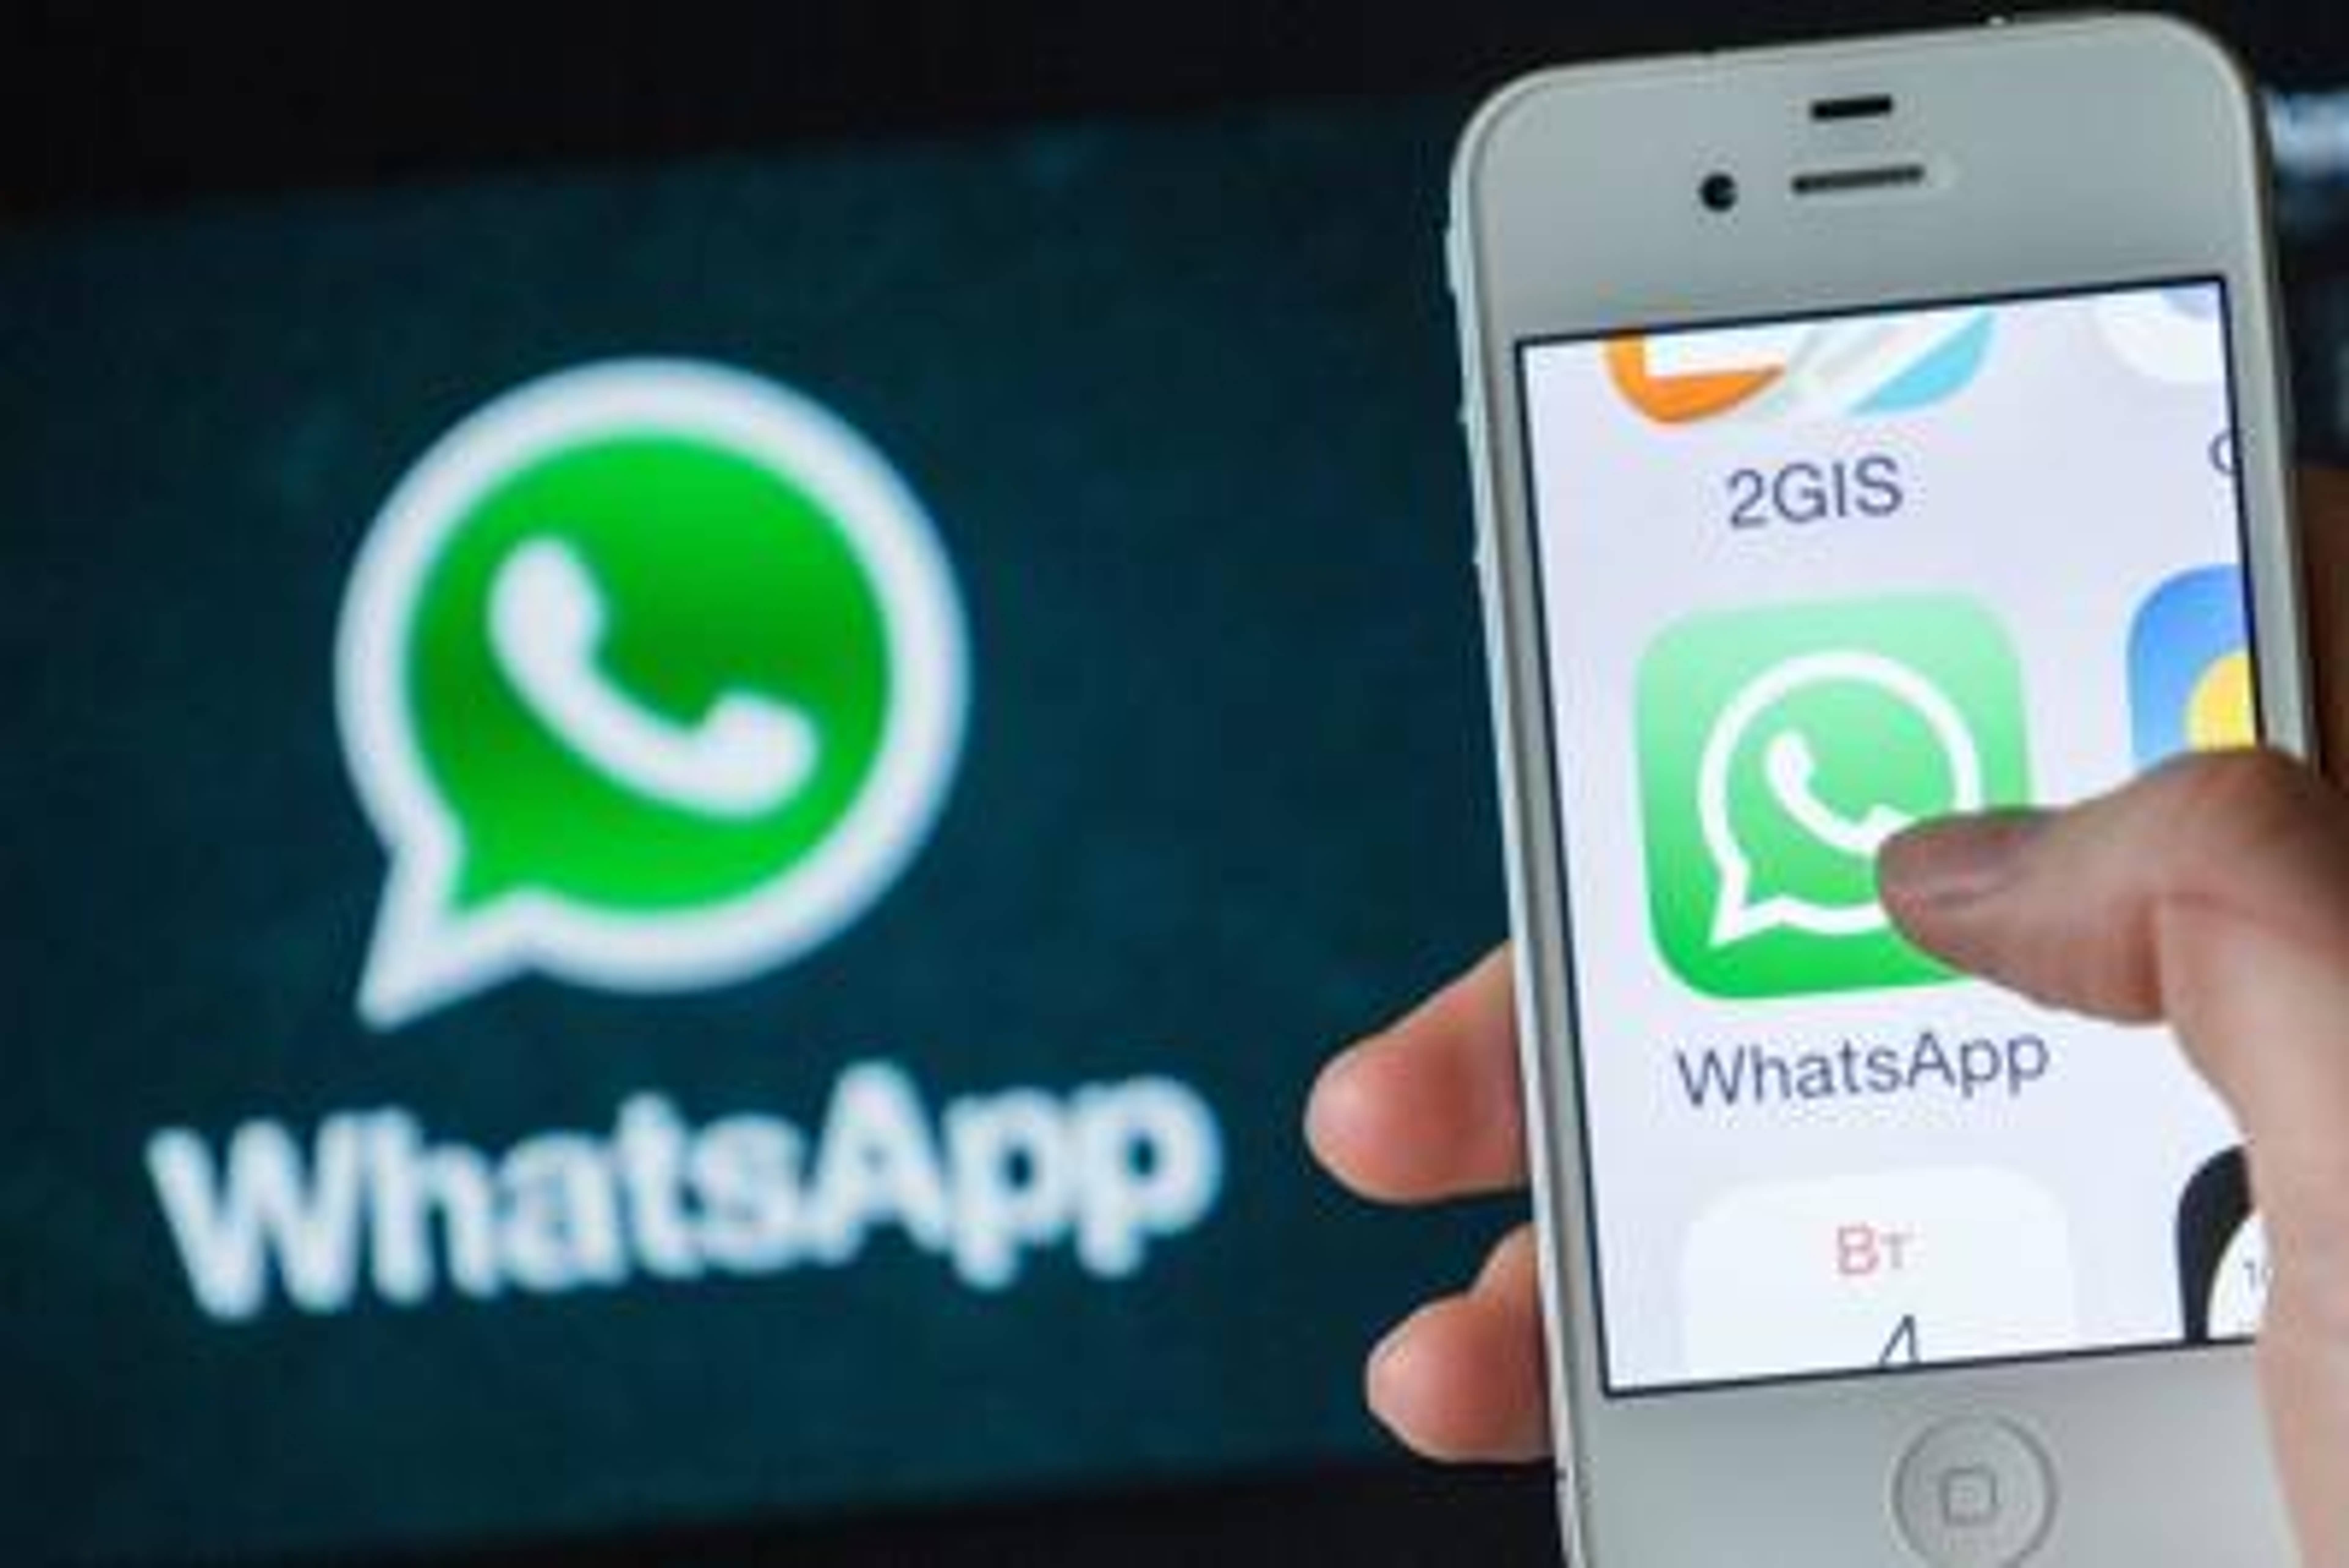 WhatsApp Adds PC Video Calling To Compete With Zoom